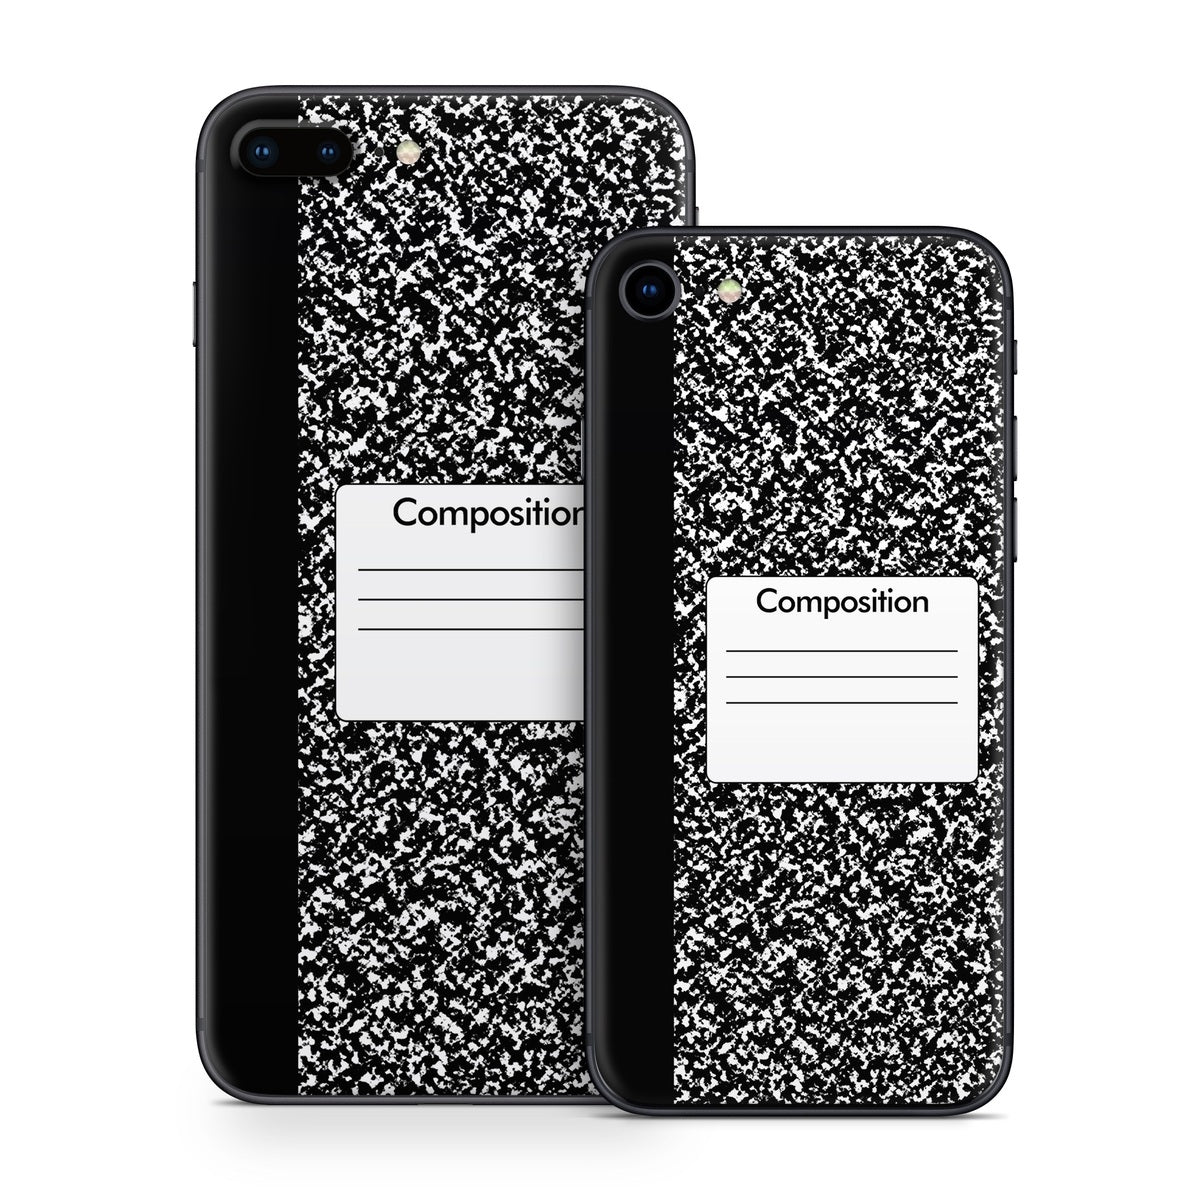 Composition Notebook - Apple iPhone 8 Skin